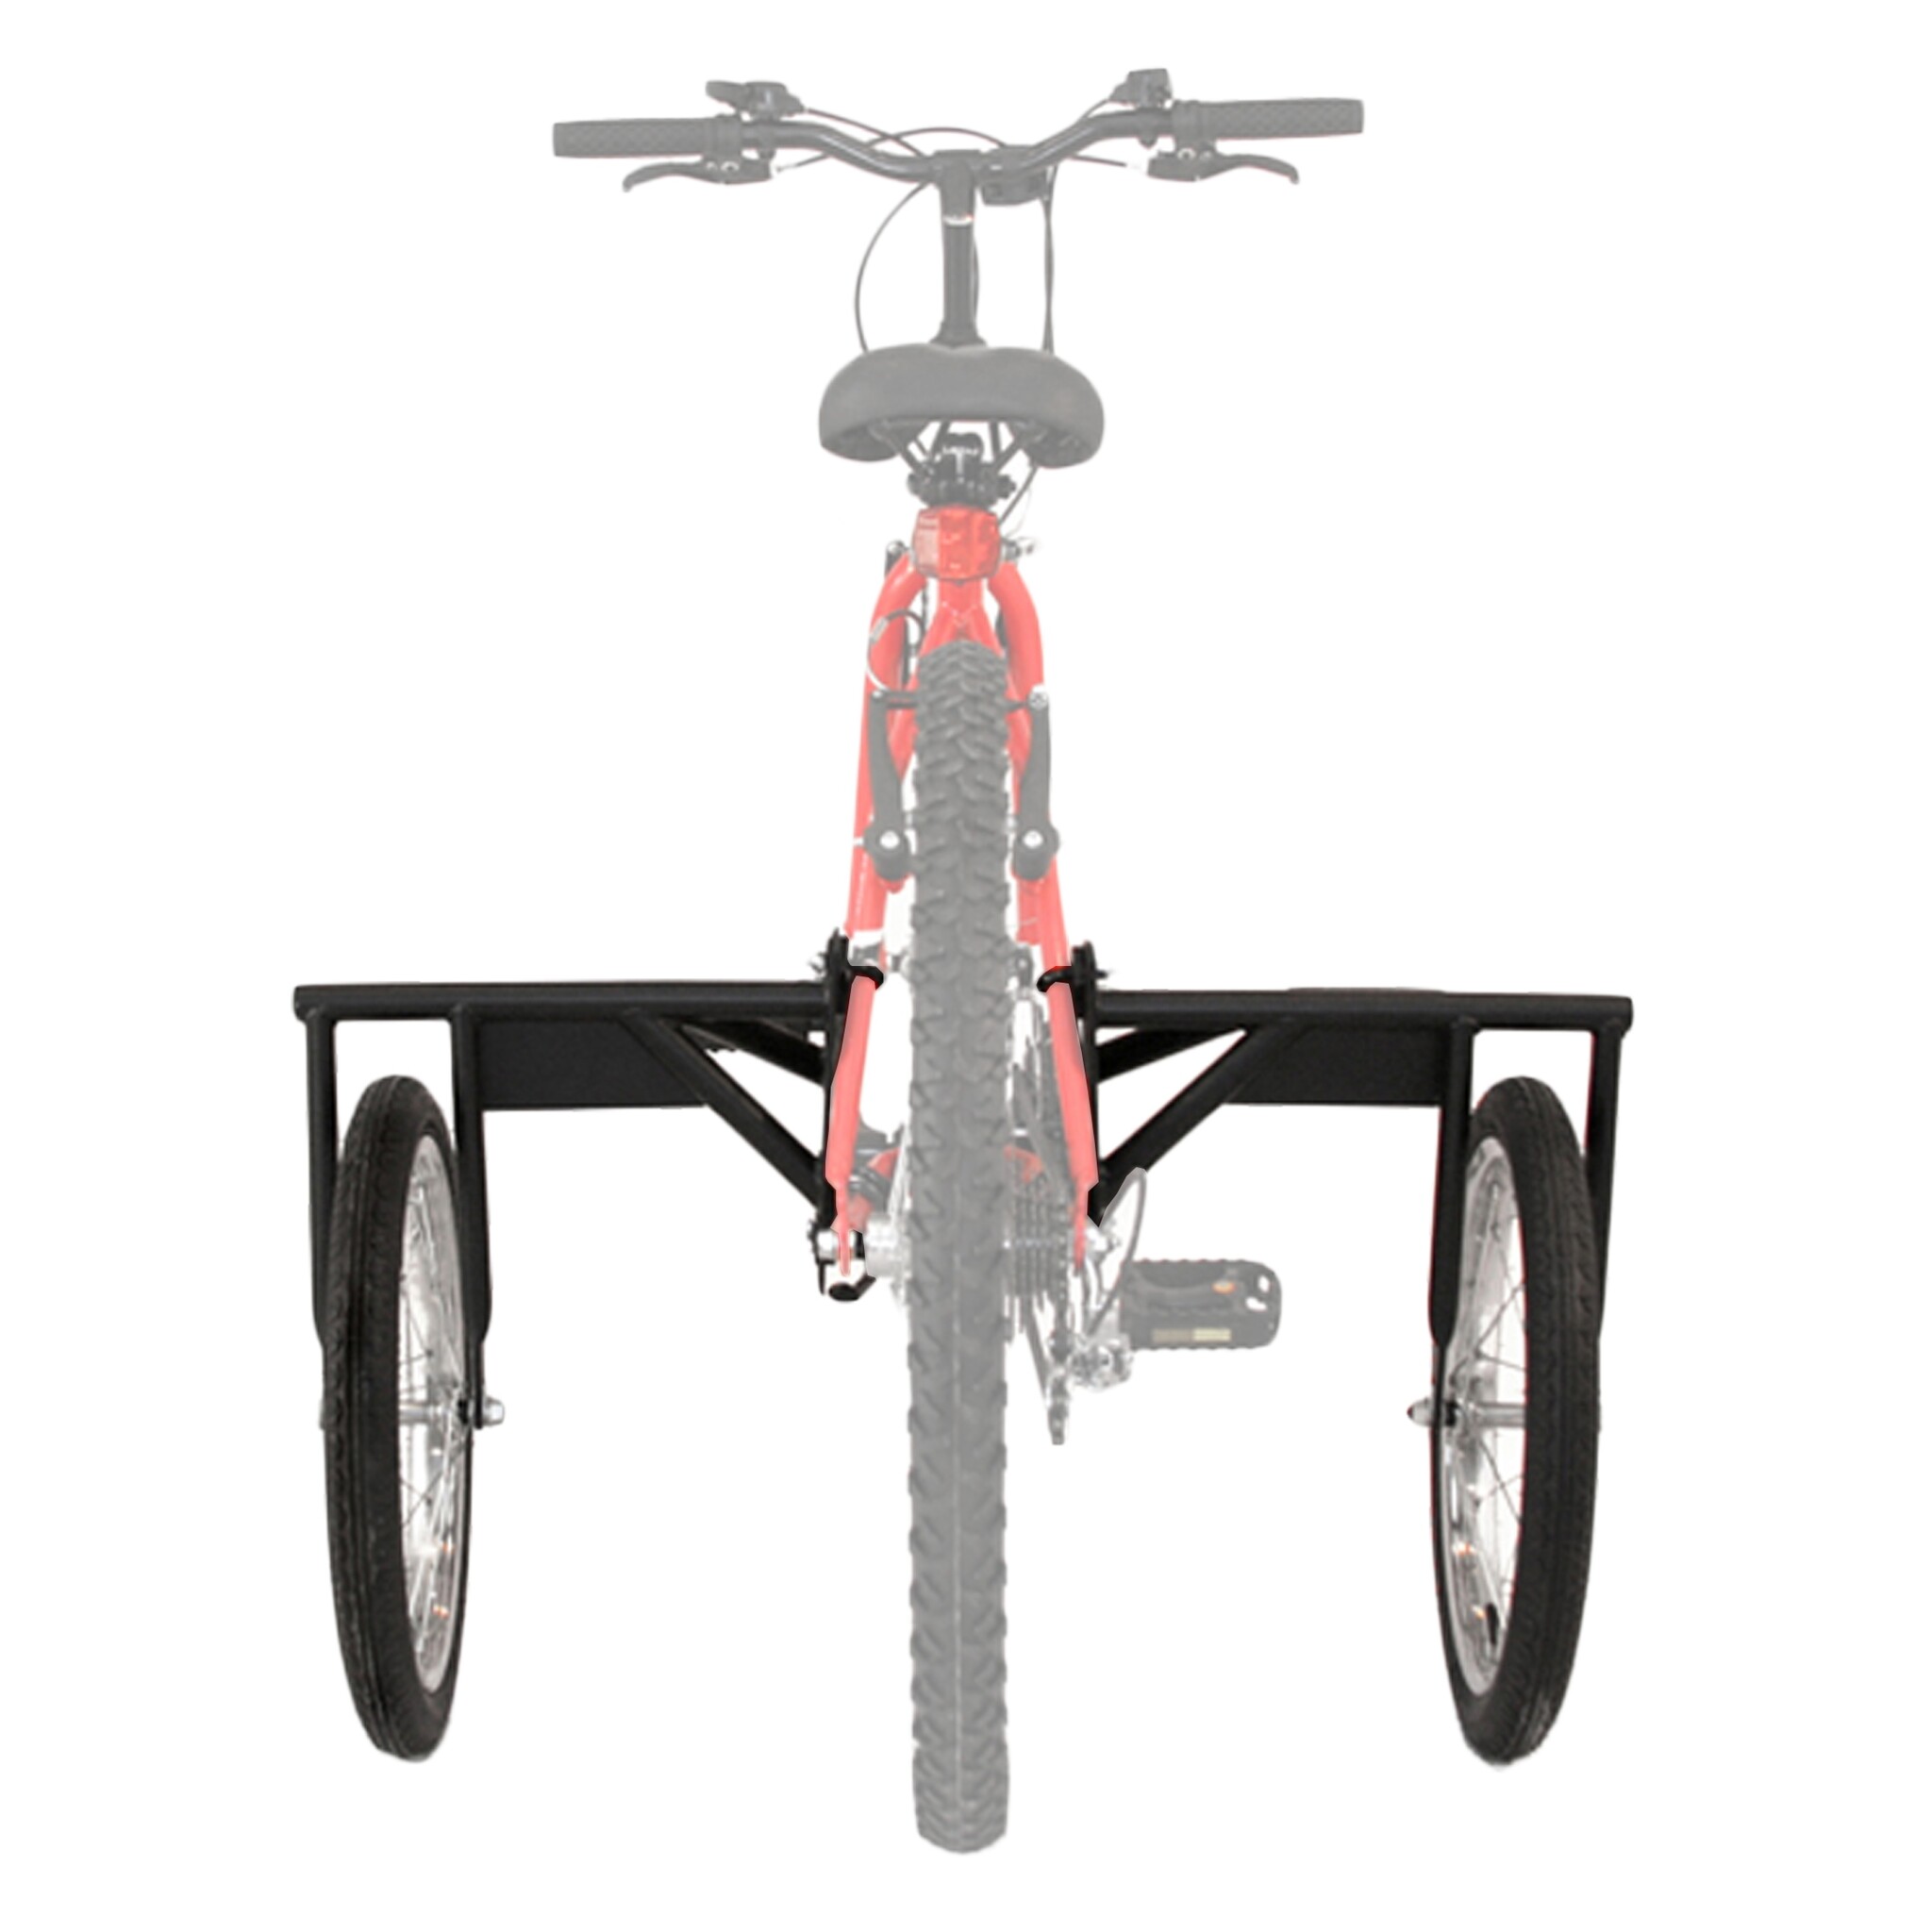 BIKE USA Adult Stabilizer Training Wheels Kit (for most 24/